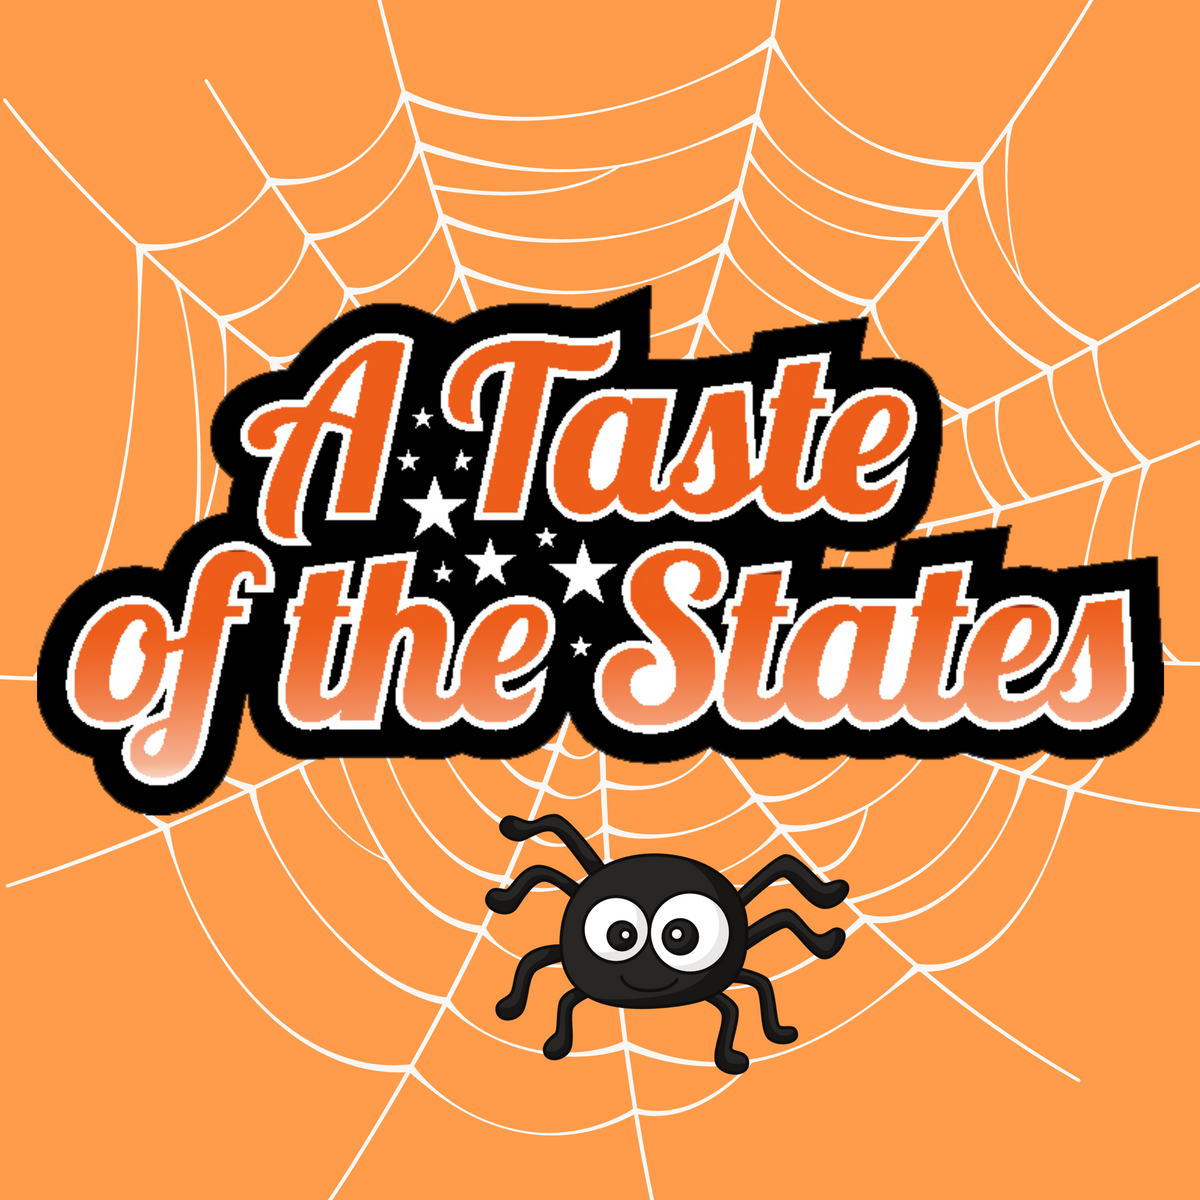 Halloween 🎃 — A Taste of the States